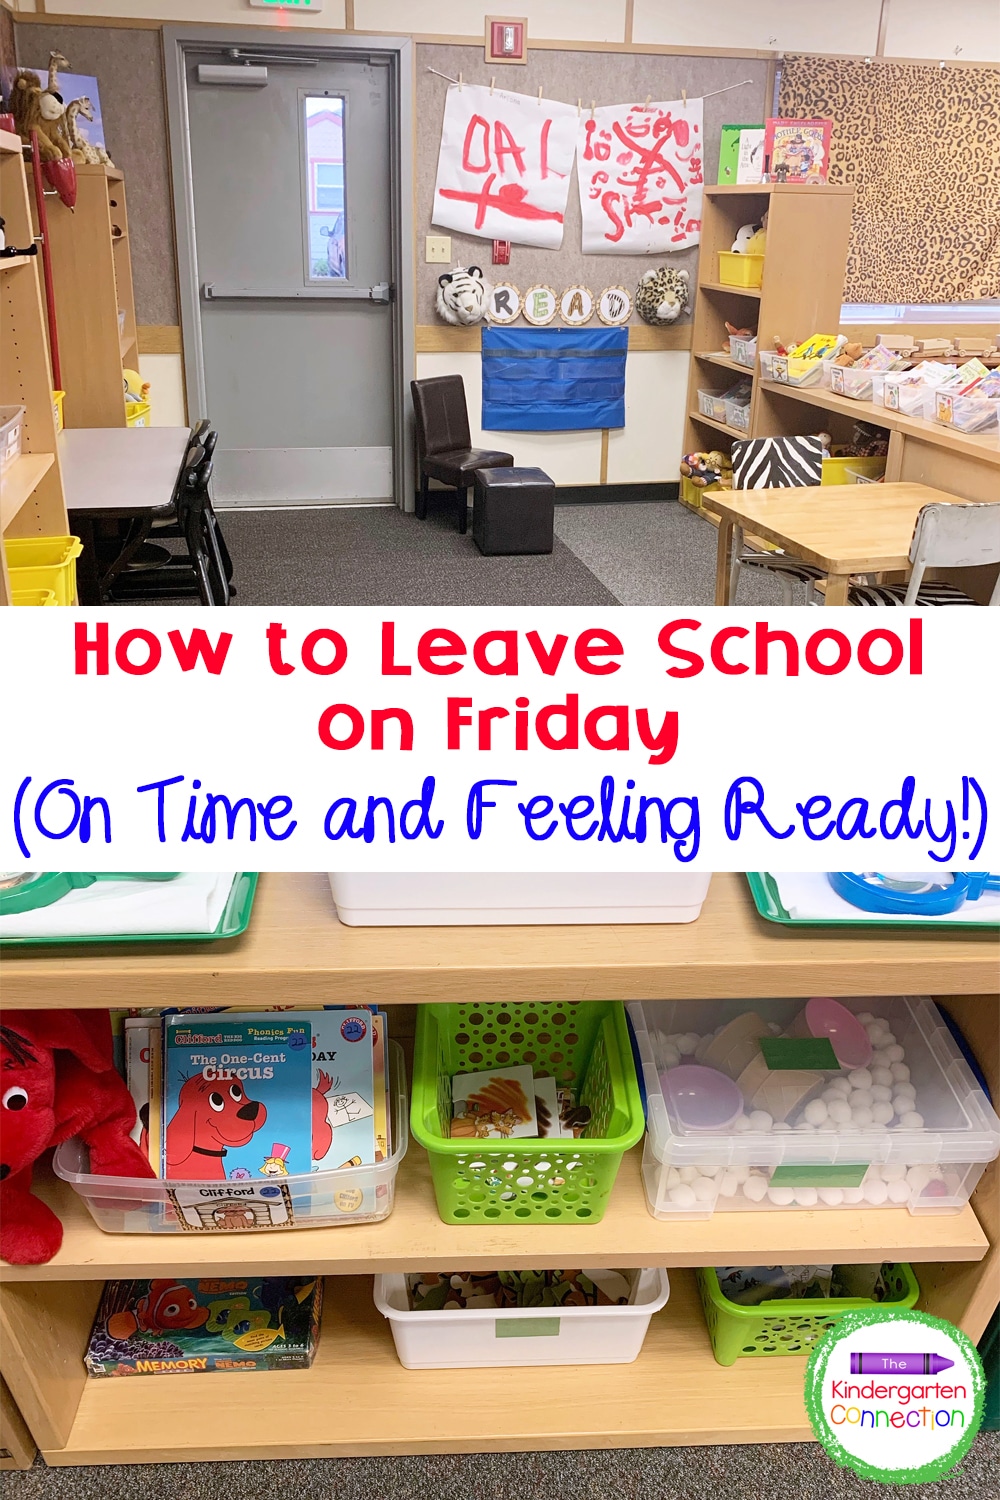 Tips for Leaving School on Friday (On Time and Feeling Ready!)